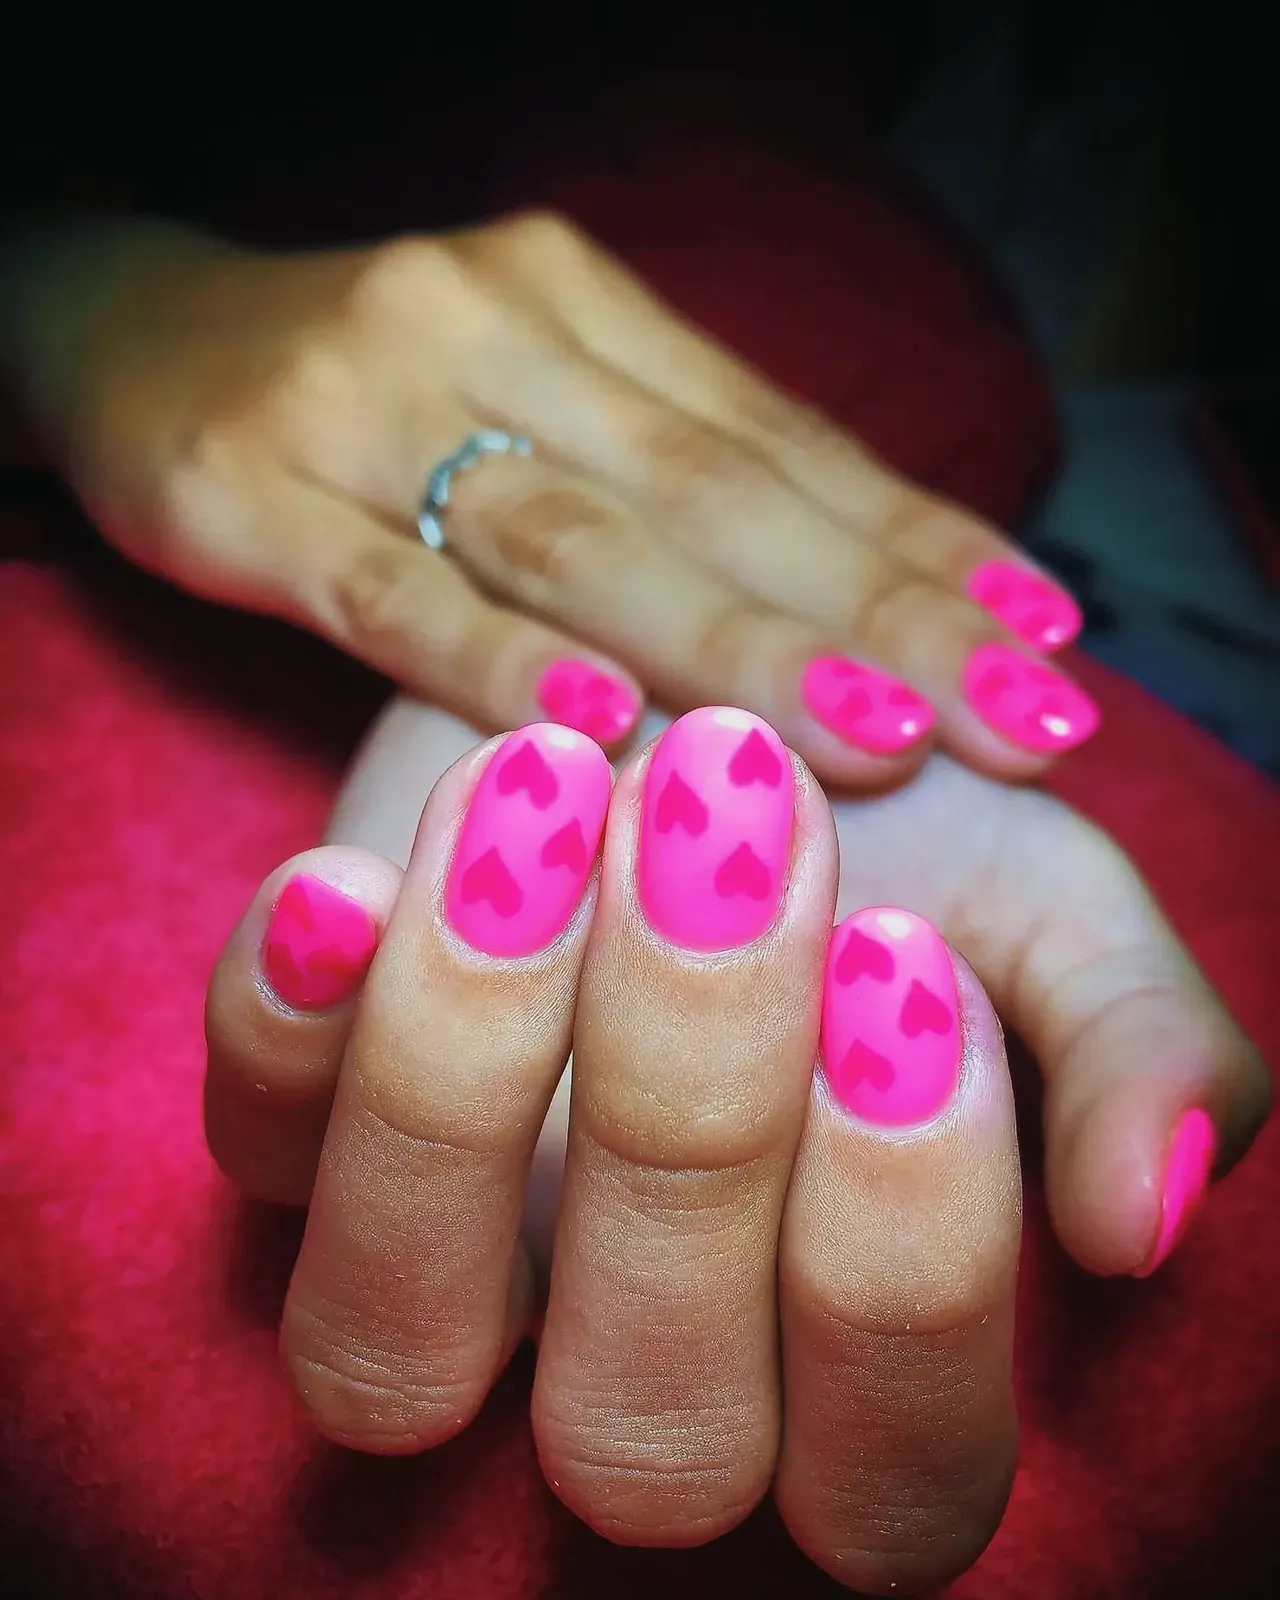 Close-up shot of beautifully manicured nails painted in vibrant pink